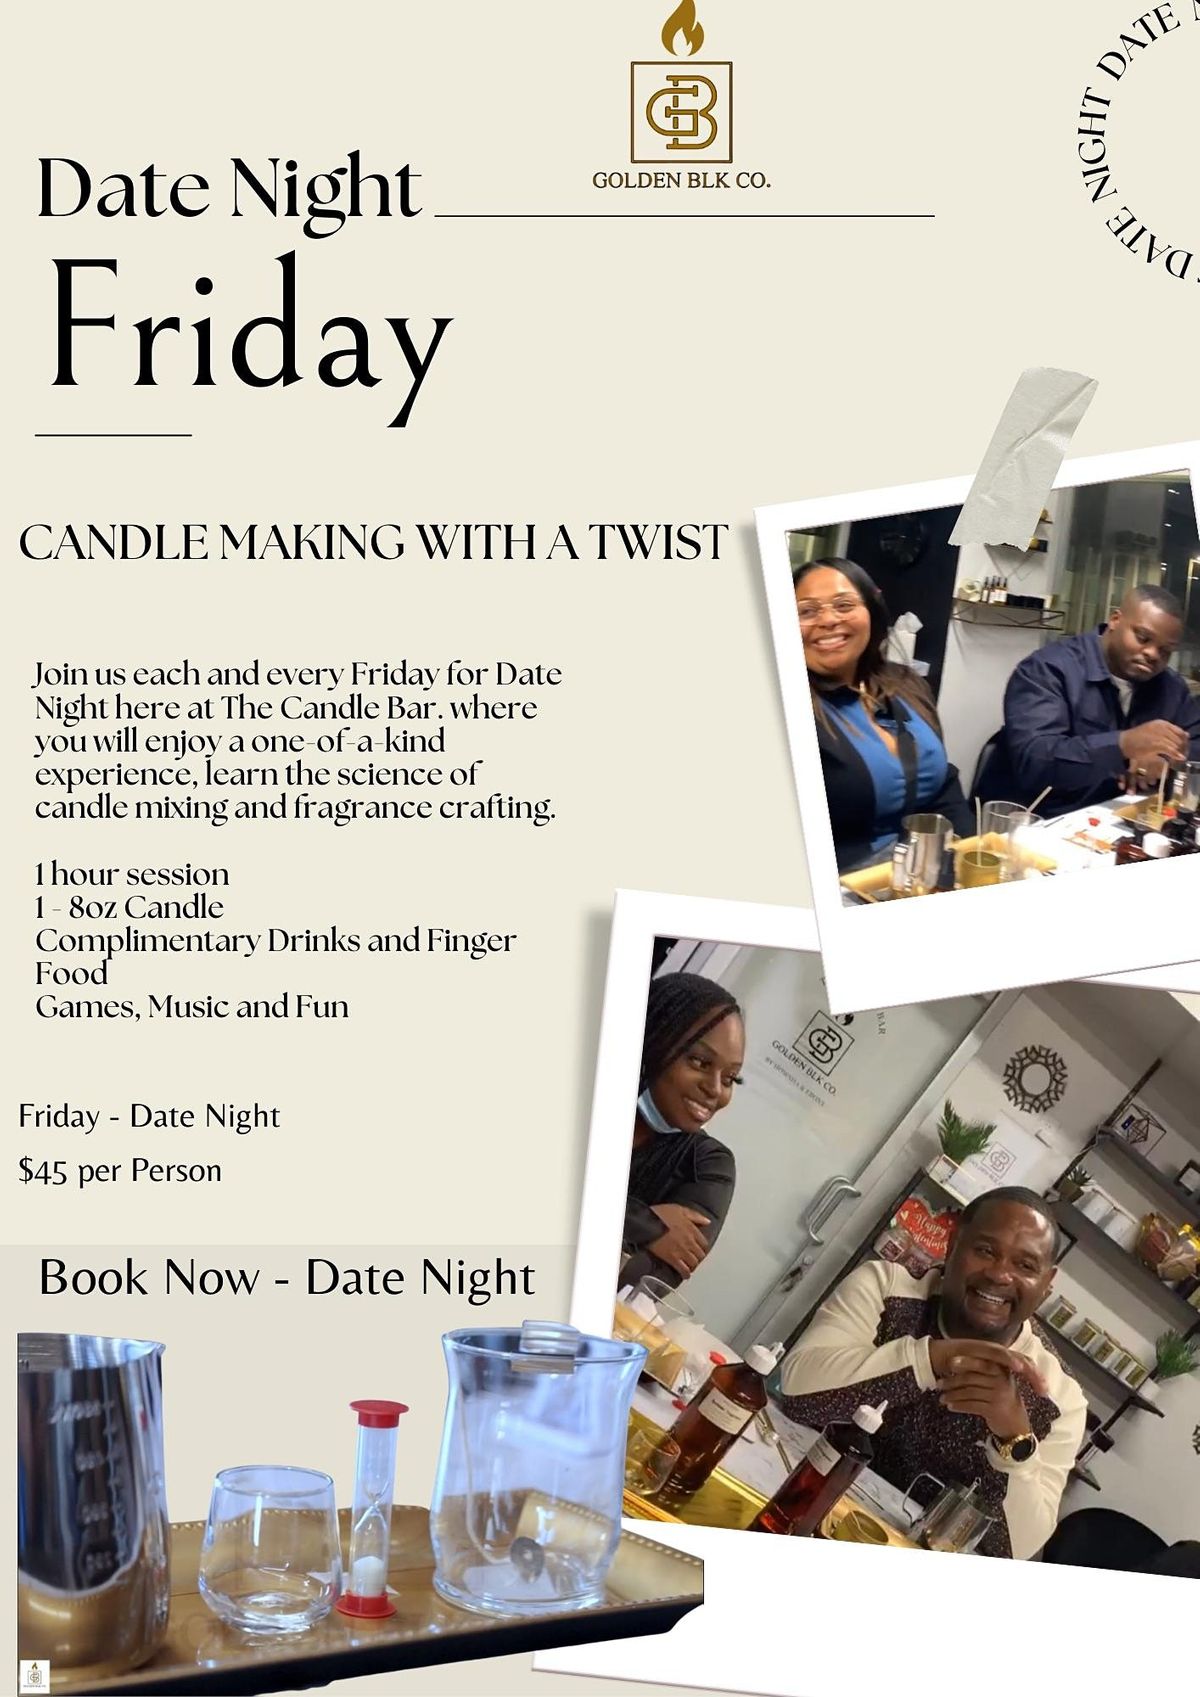 Date Night Edition: Candle Making With A Twist